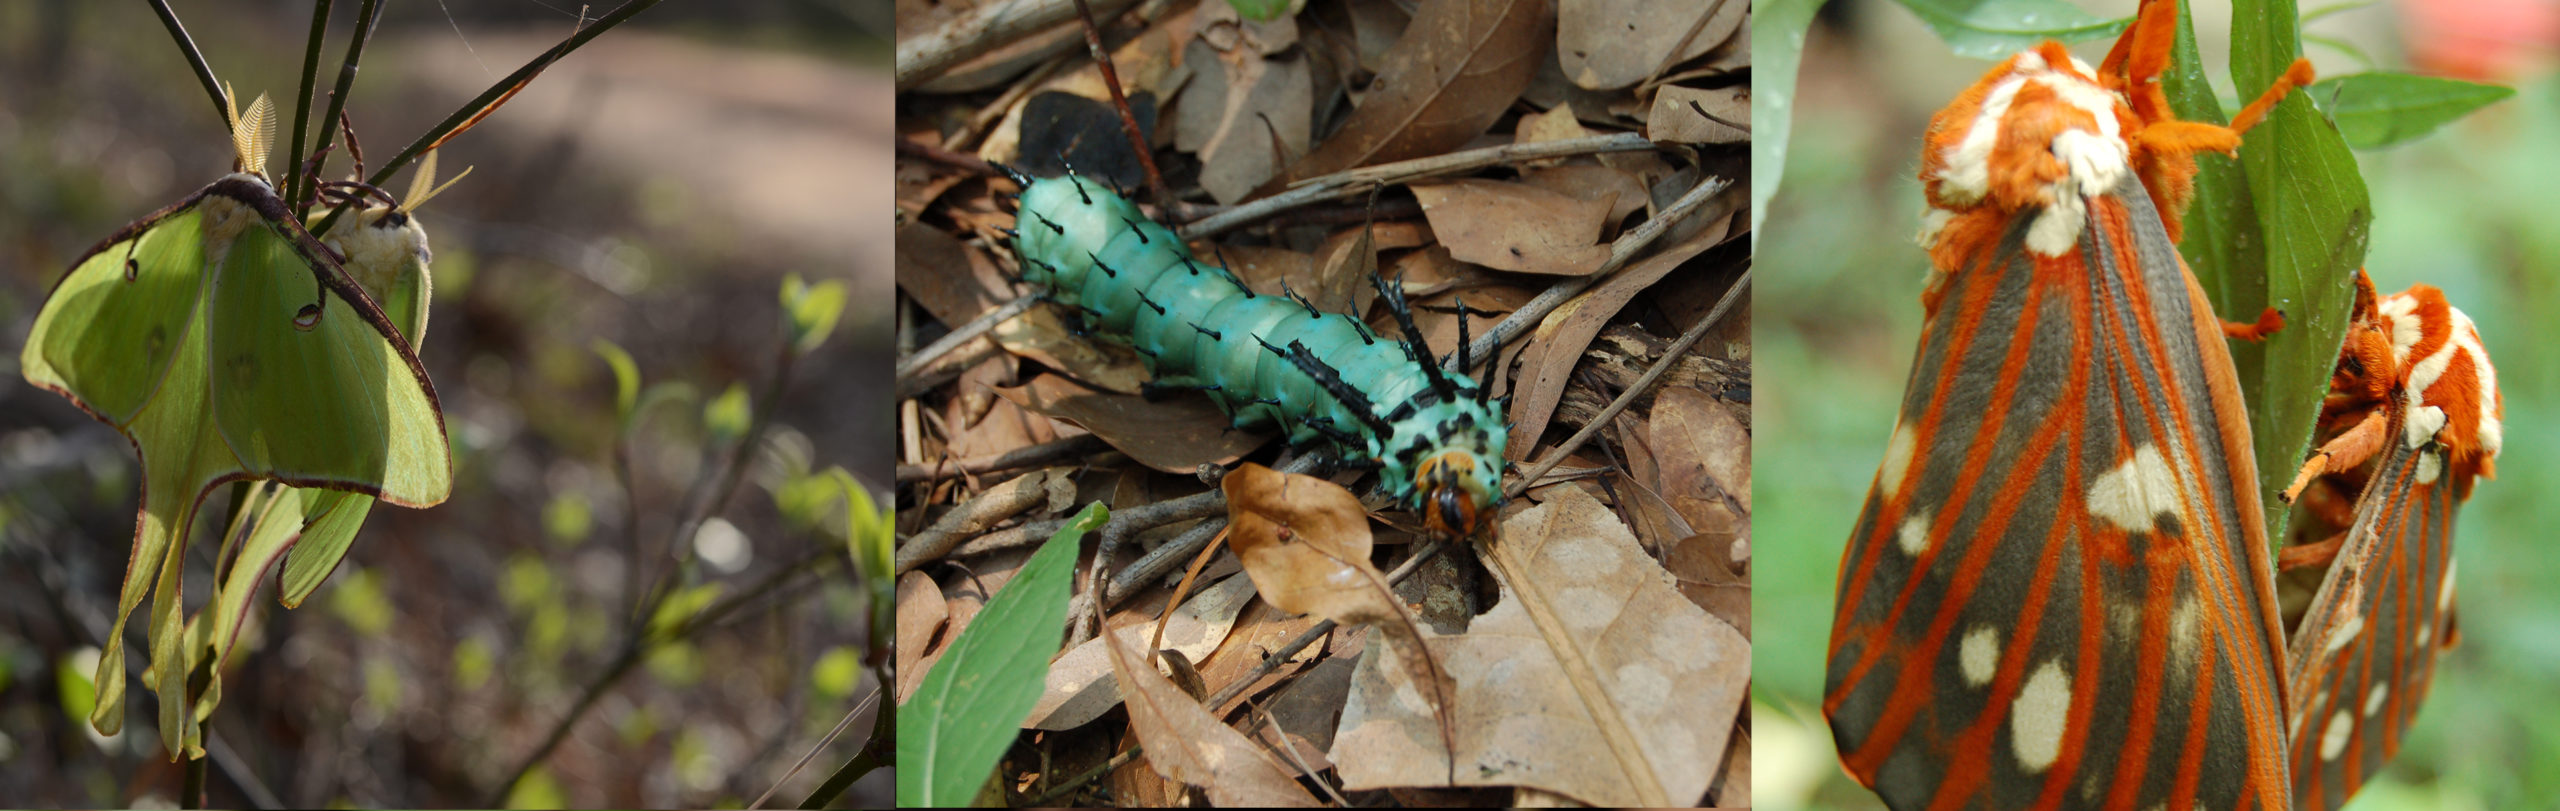 3 separate images of moths and caterpillars. green moth (left), blue spiky caterpillar (middle), and white and orange moth (right)